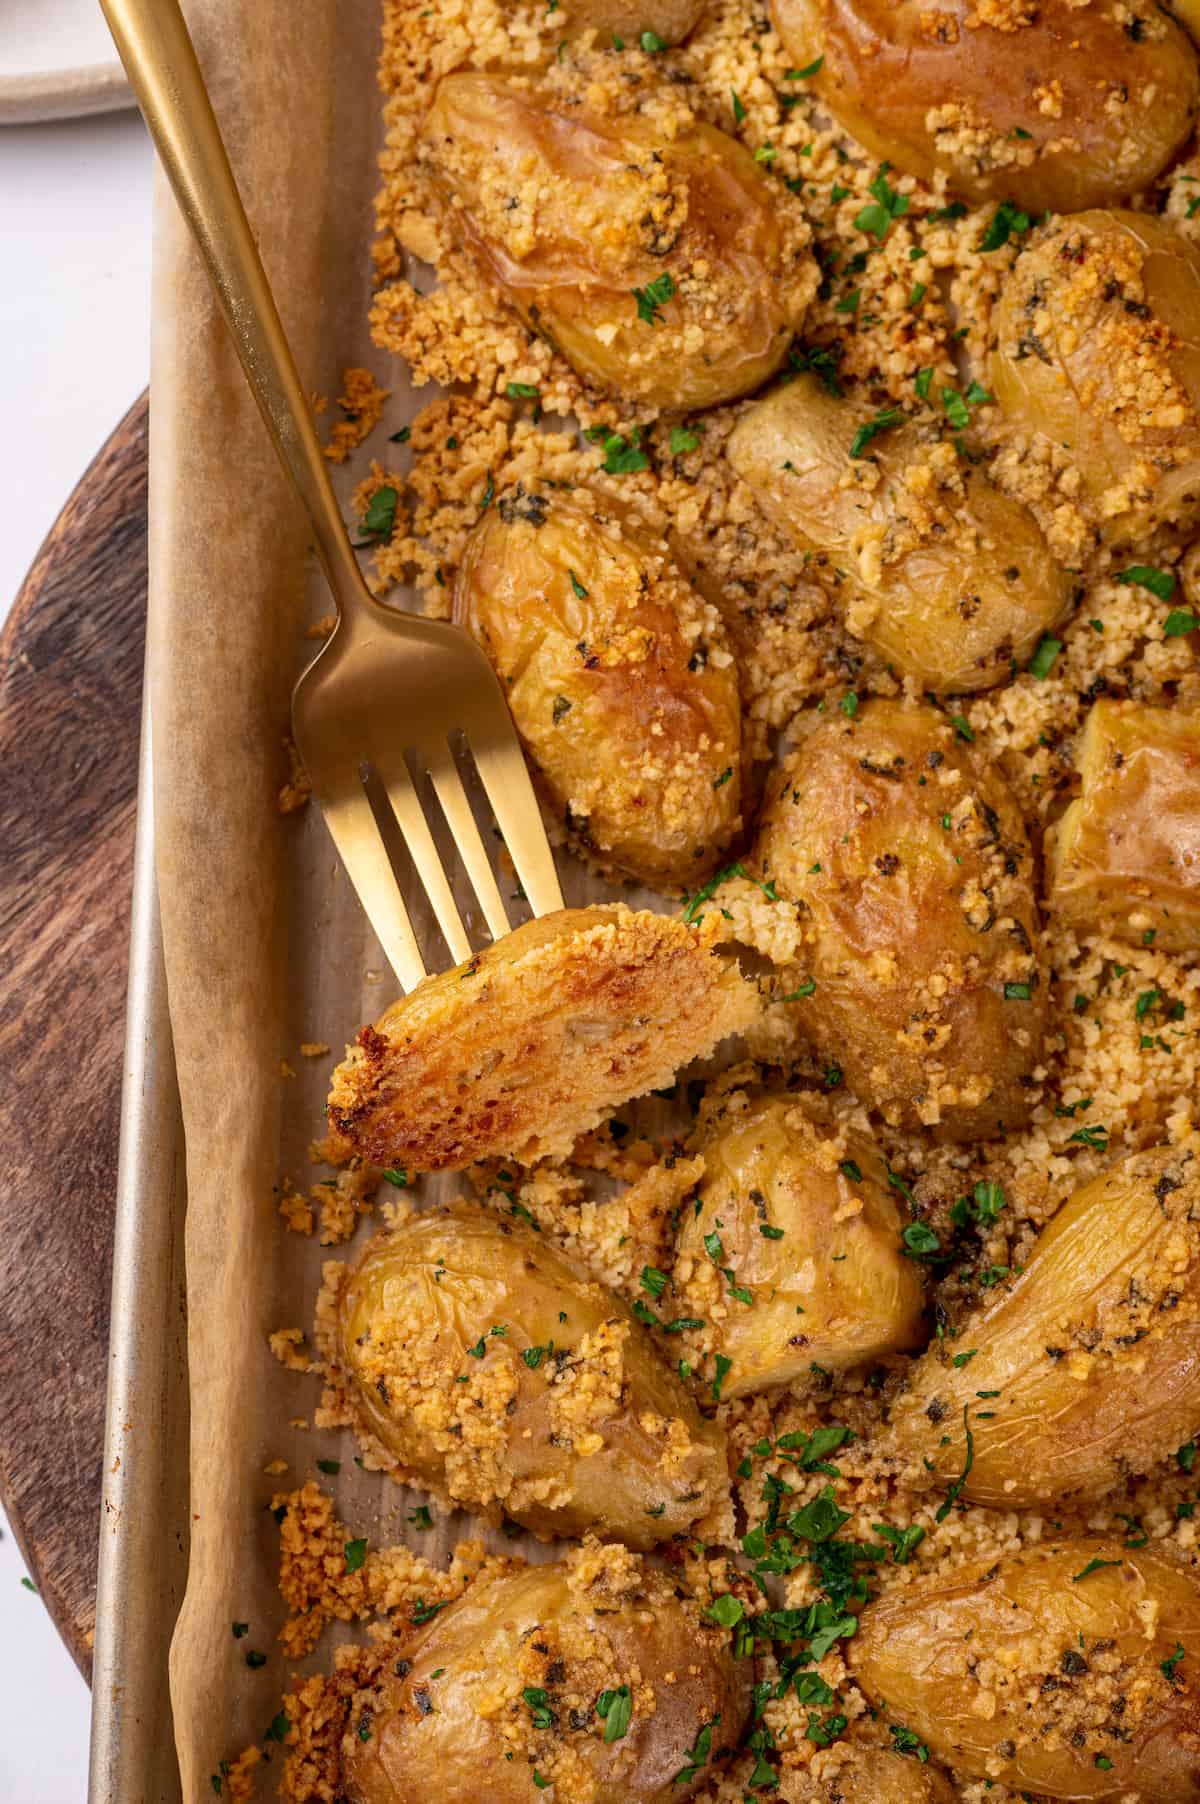 Parmesan-crusted potatoes on baking sheet with fork